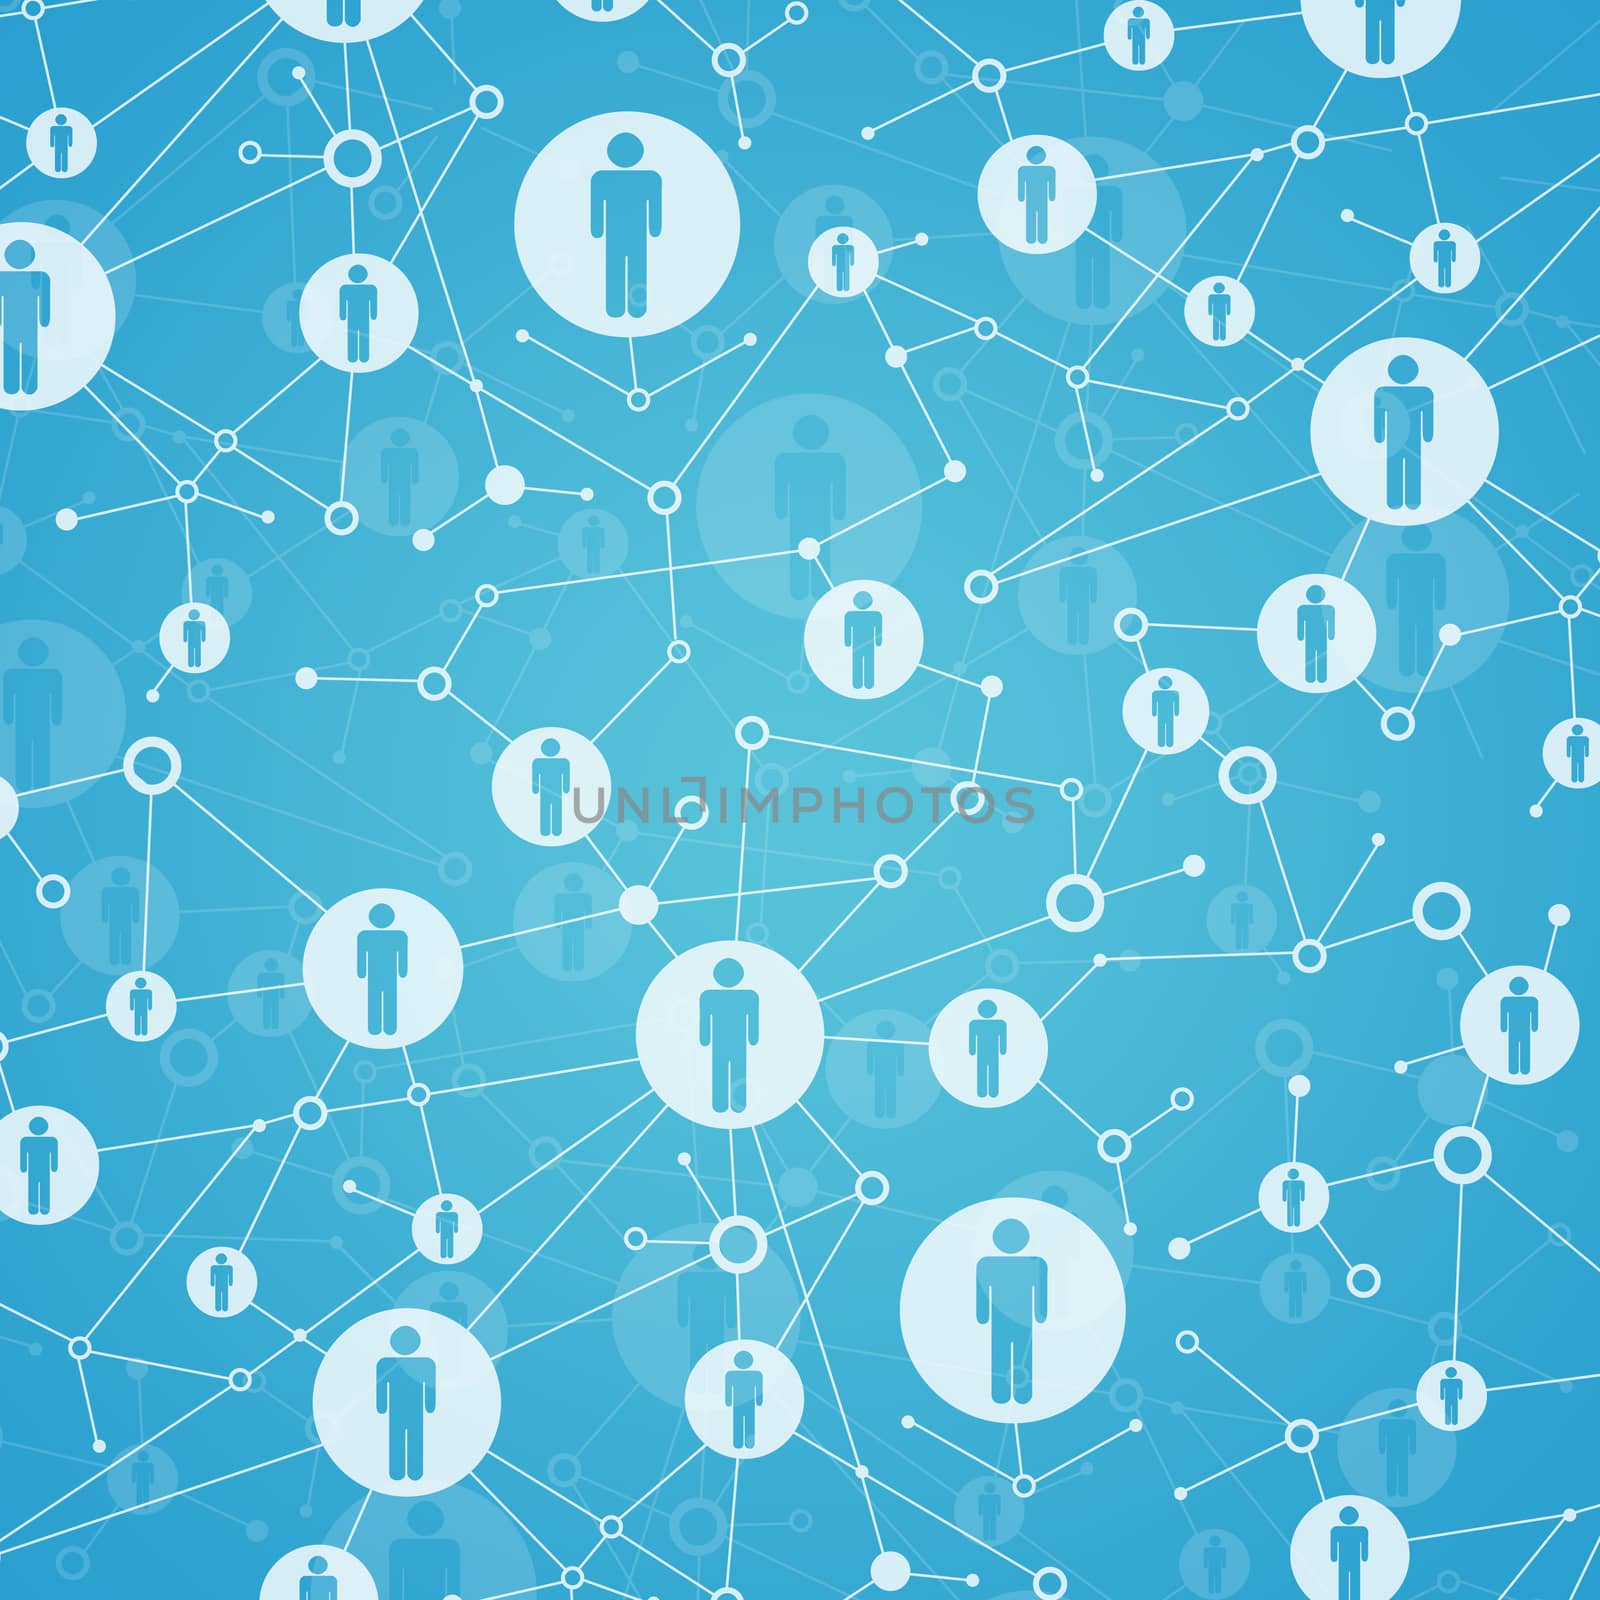 Social network. In the lattice points are people icons. Blue background